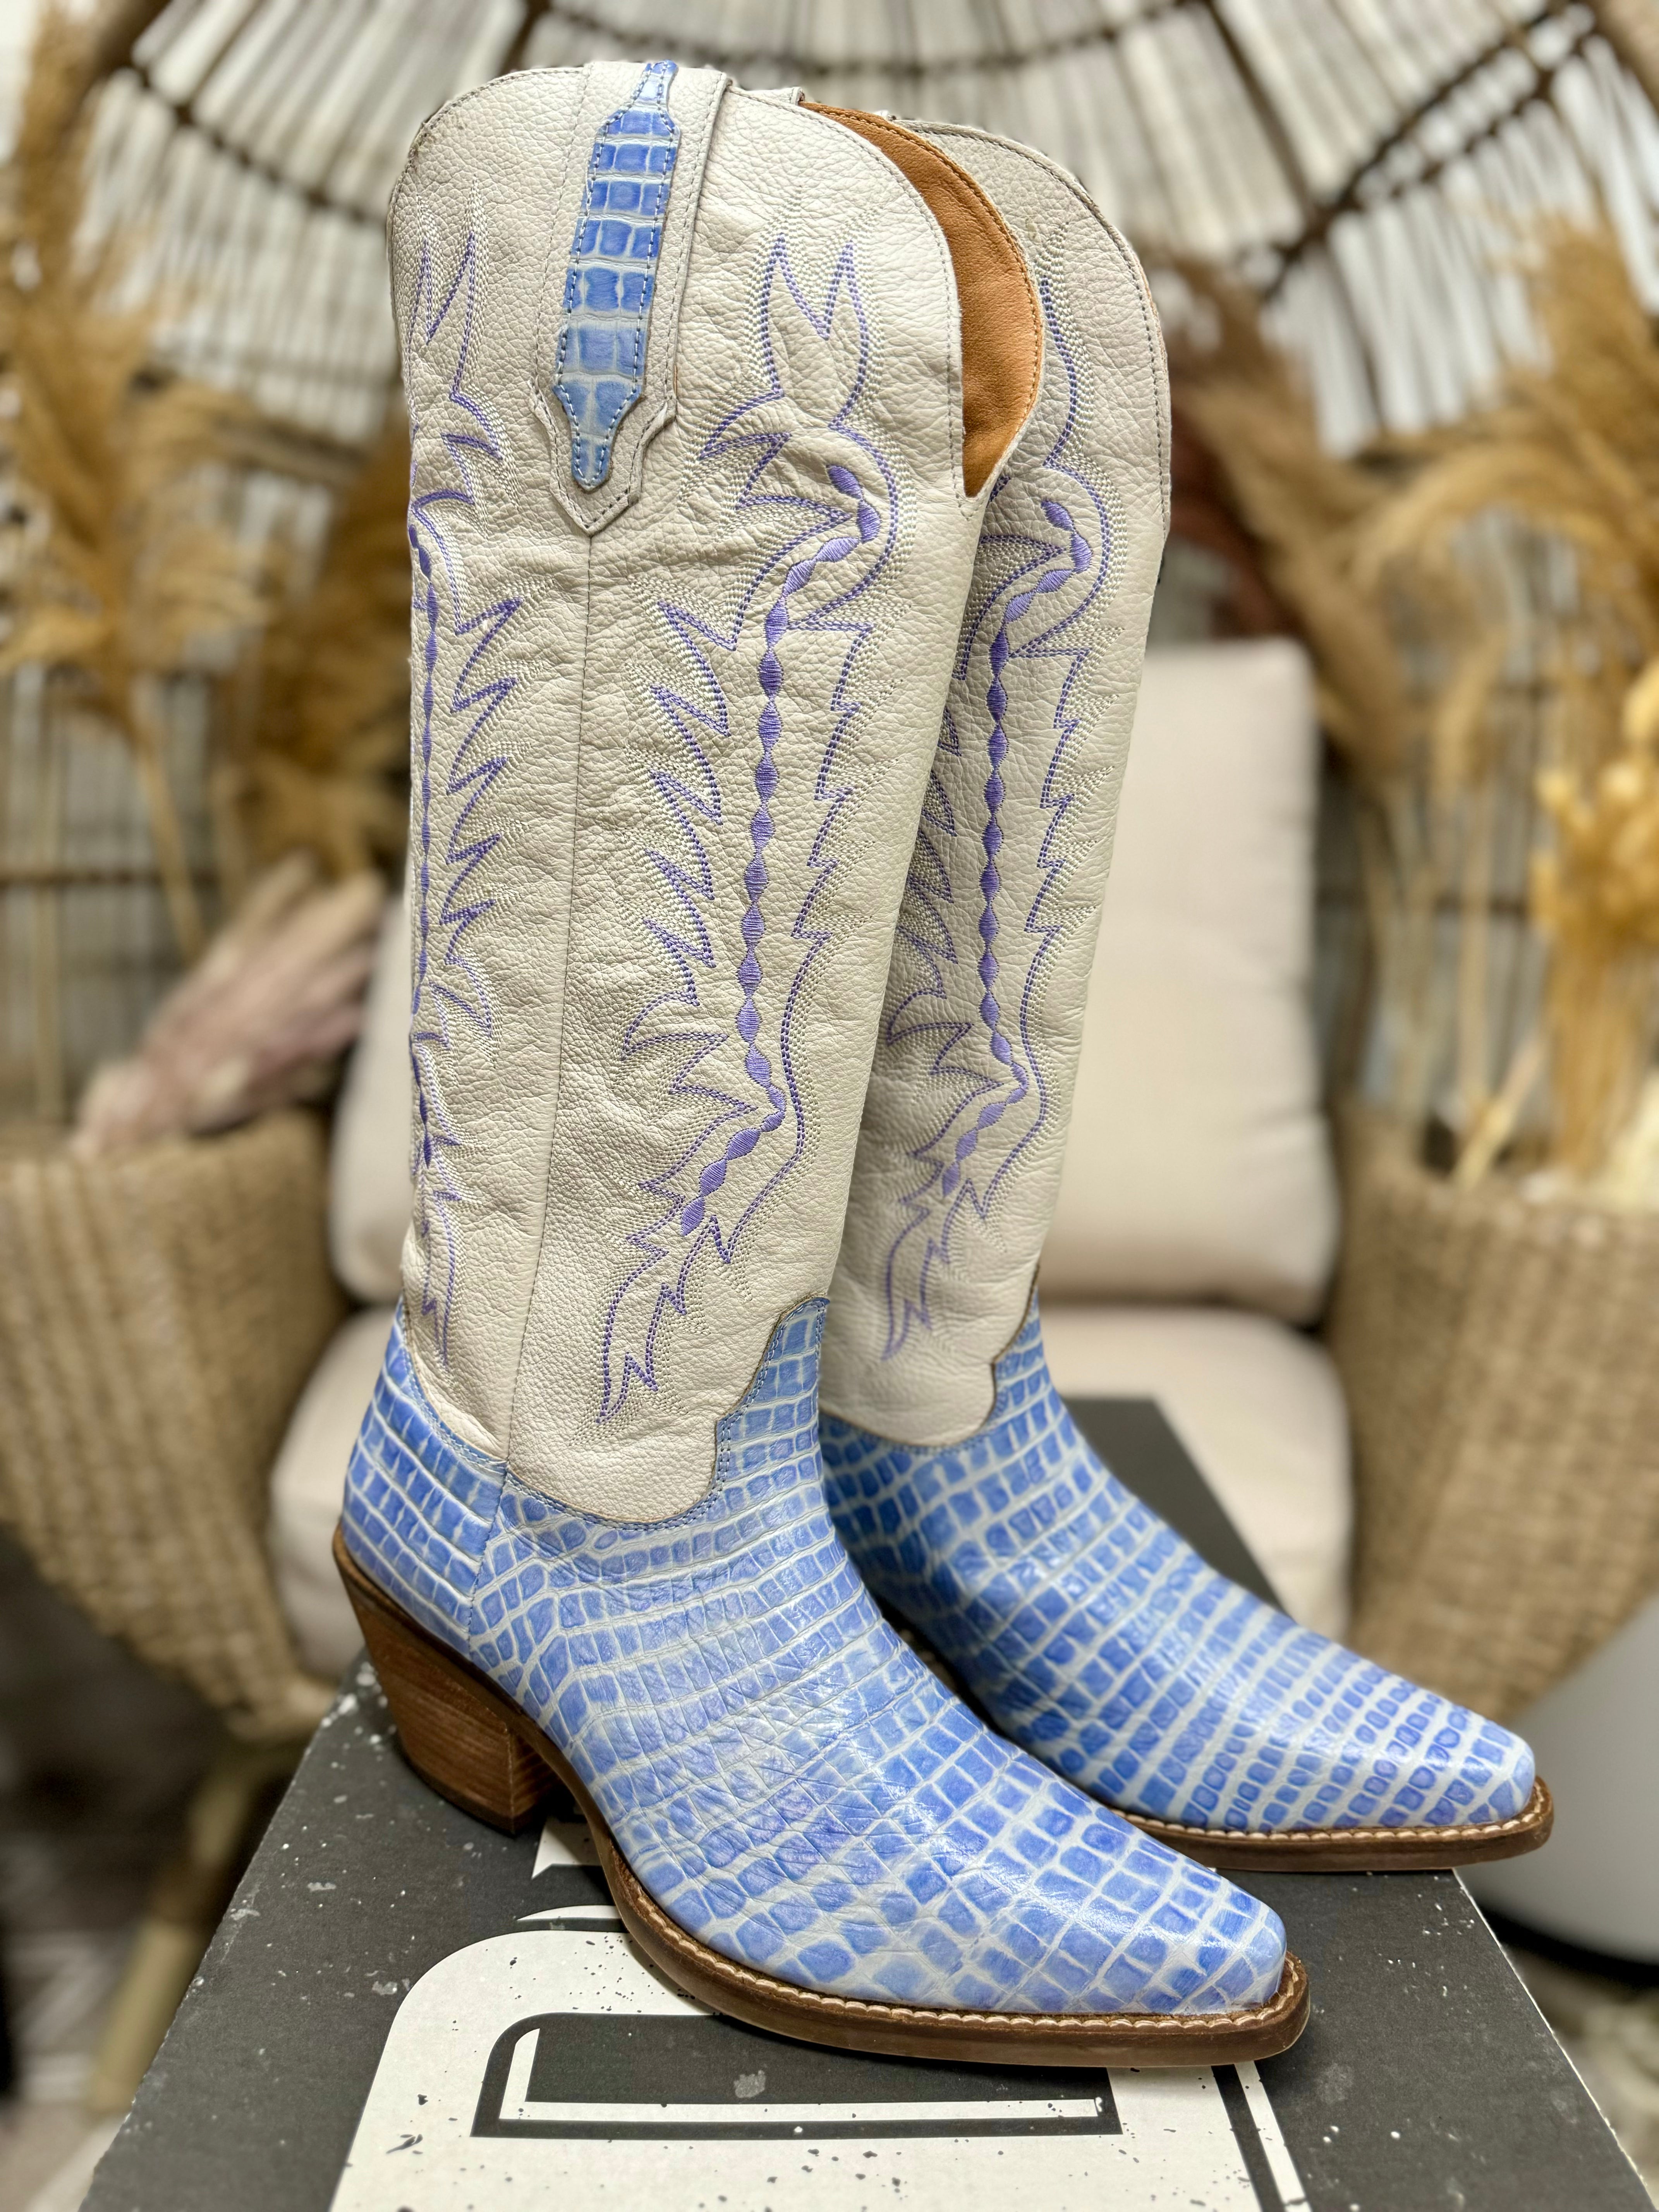 *DISCONTINUED* Dingo | High Lonesome Leather Cowboy Boots in Periwinkle Purple - Last Chance Size 9.5